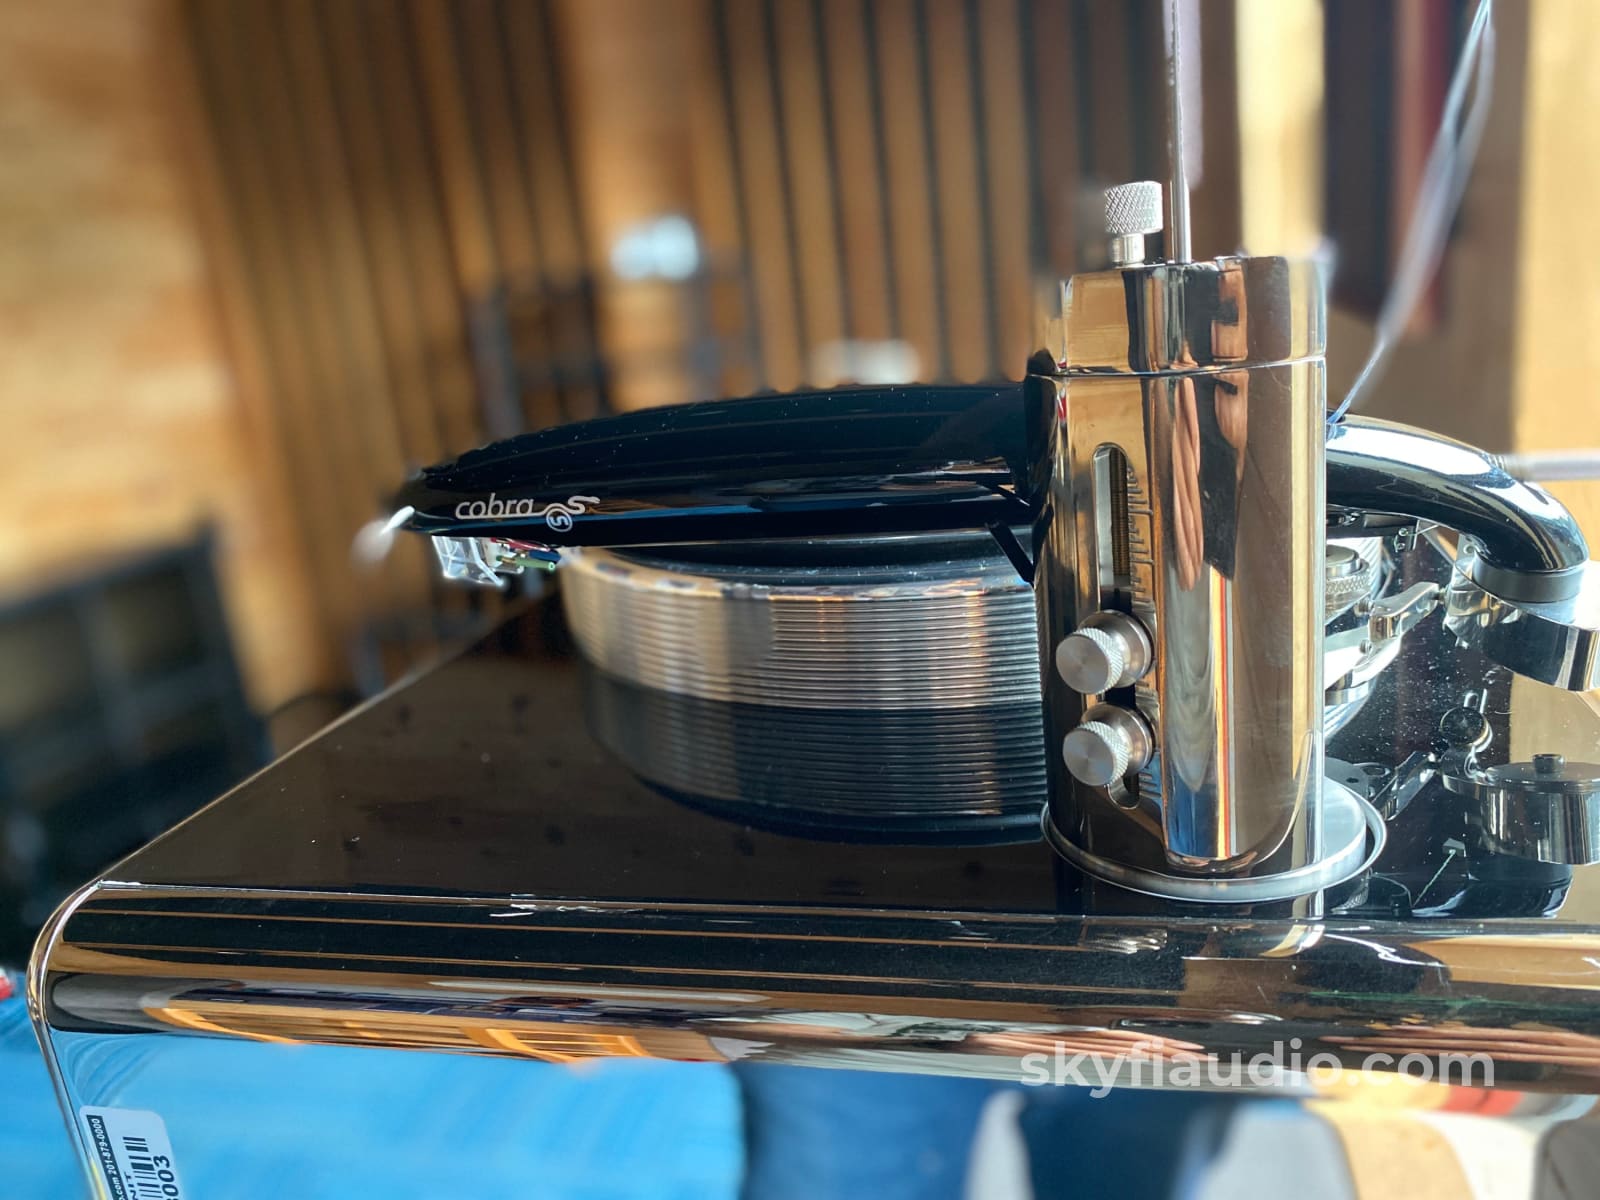 Michael Fremers Continuum Caliburn Turntable With Cobra Arm. Installed And Calibrated By The